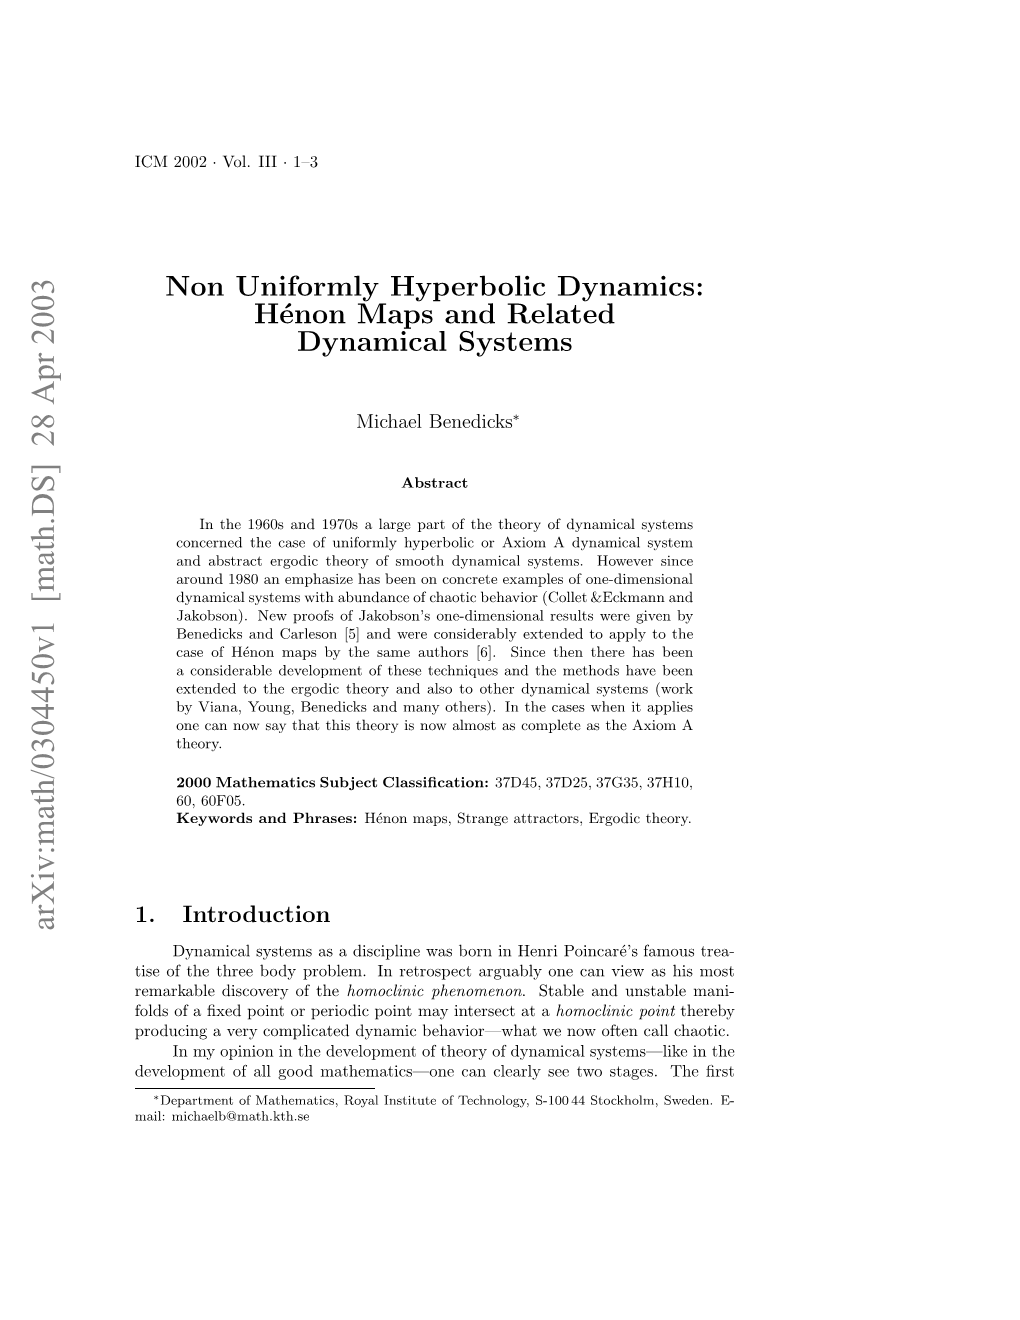 Hénon Maps and Related Dynamical Systems